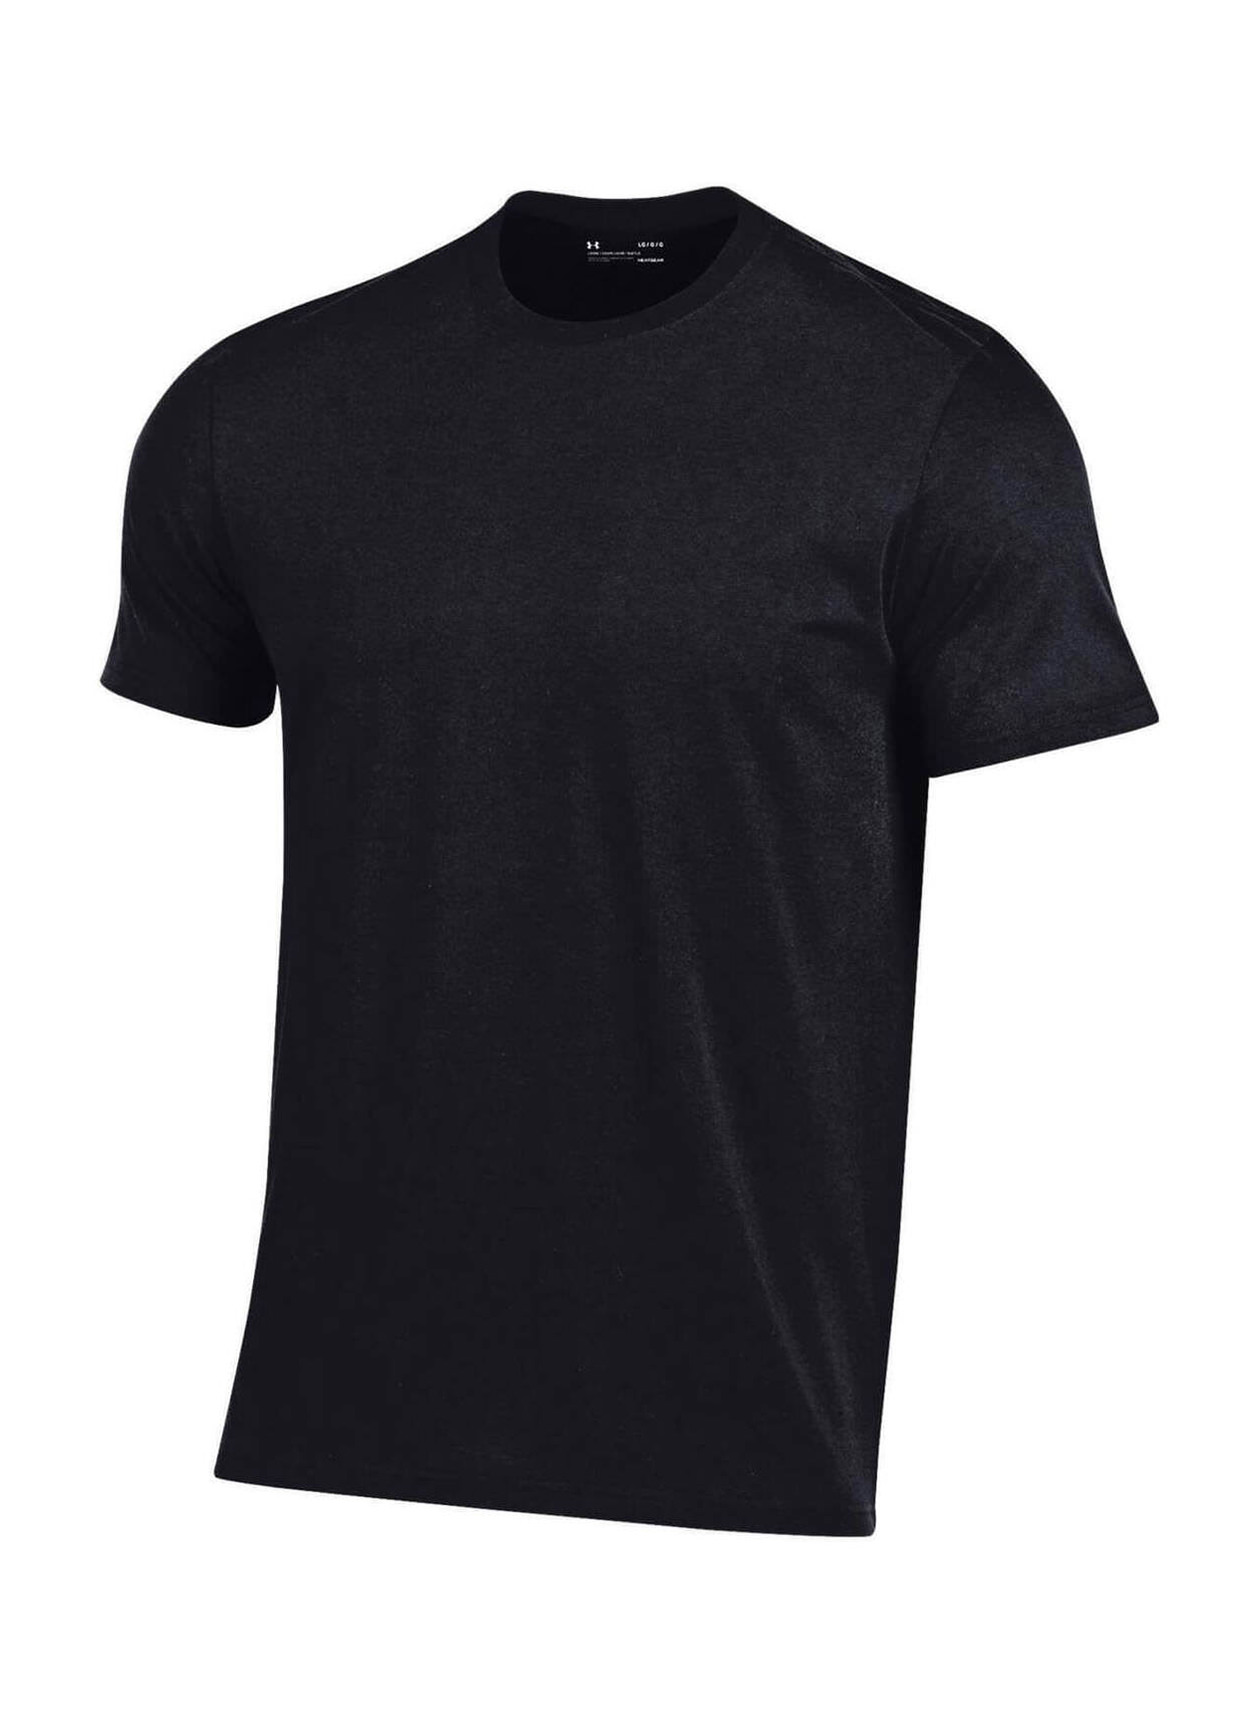 12ct. Custom Under Armour Men's Performance Cotton T-Shirt by Corporate Gear